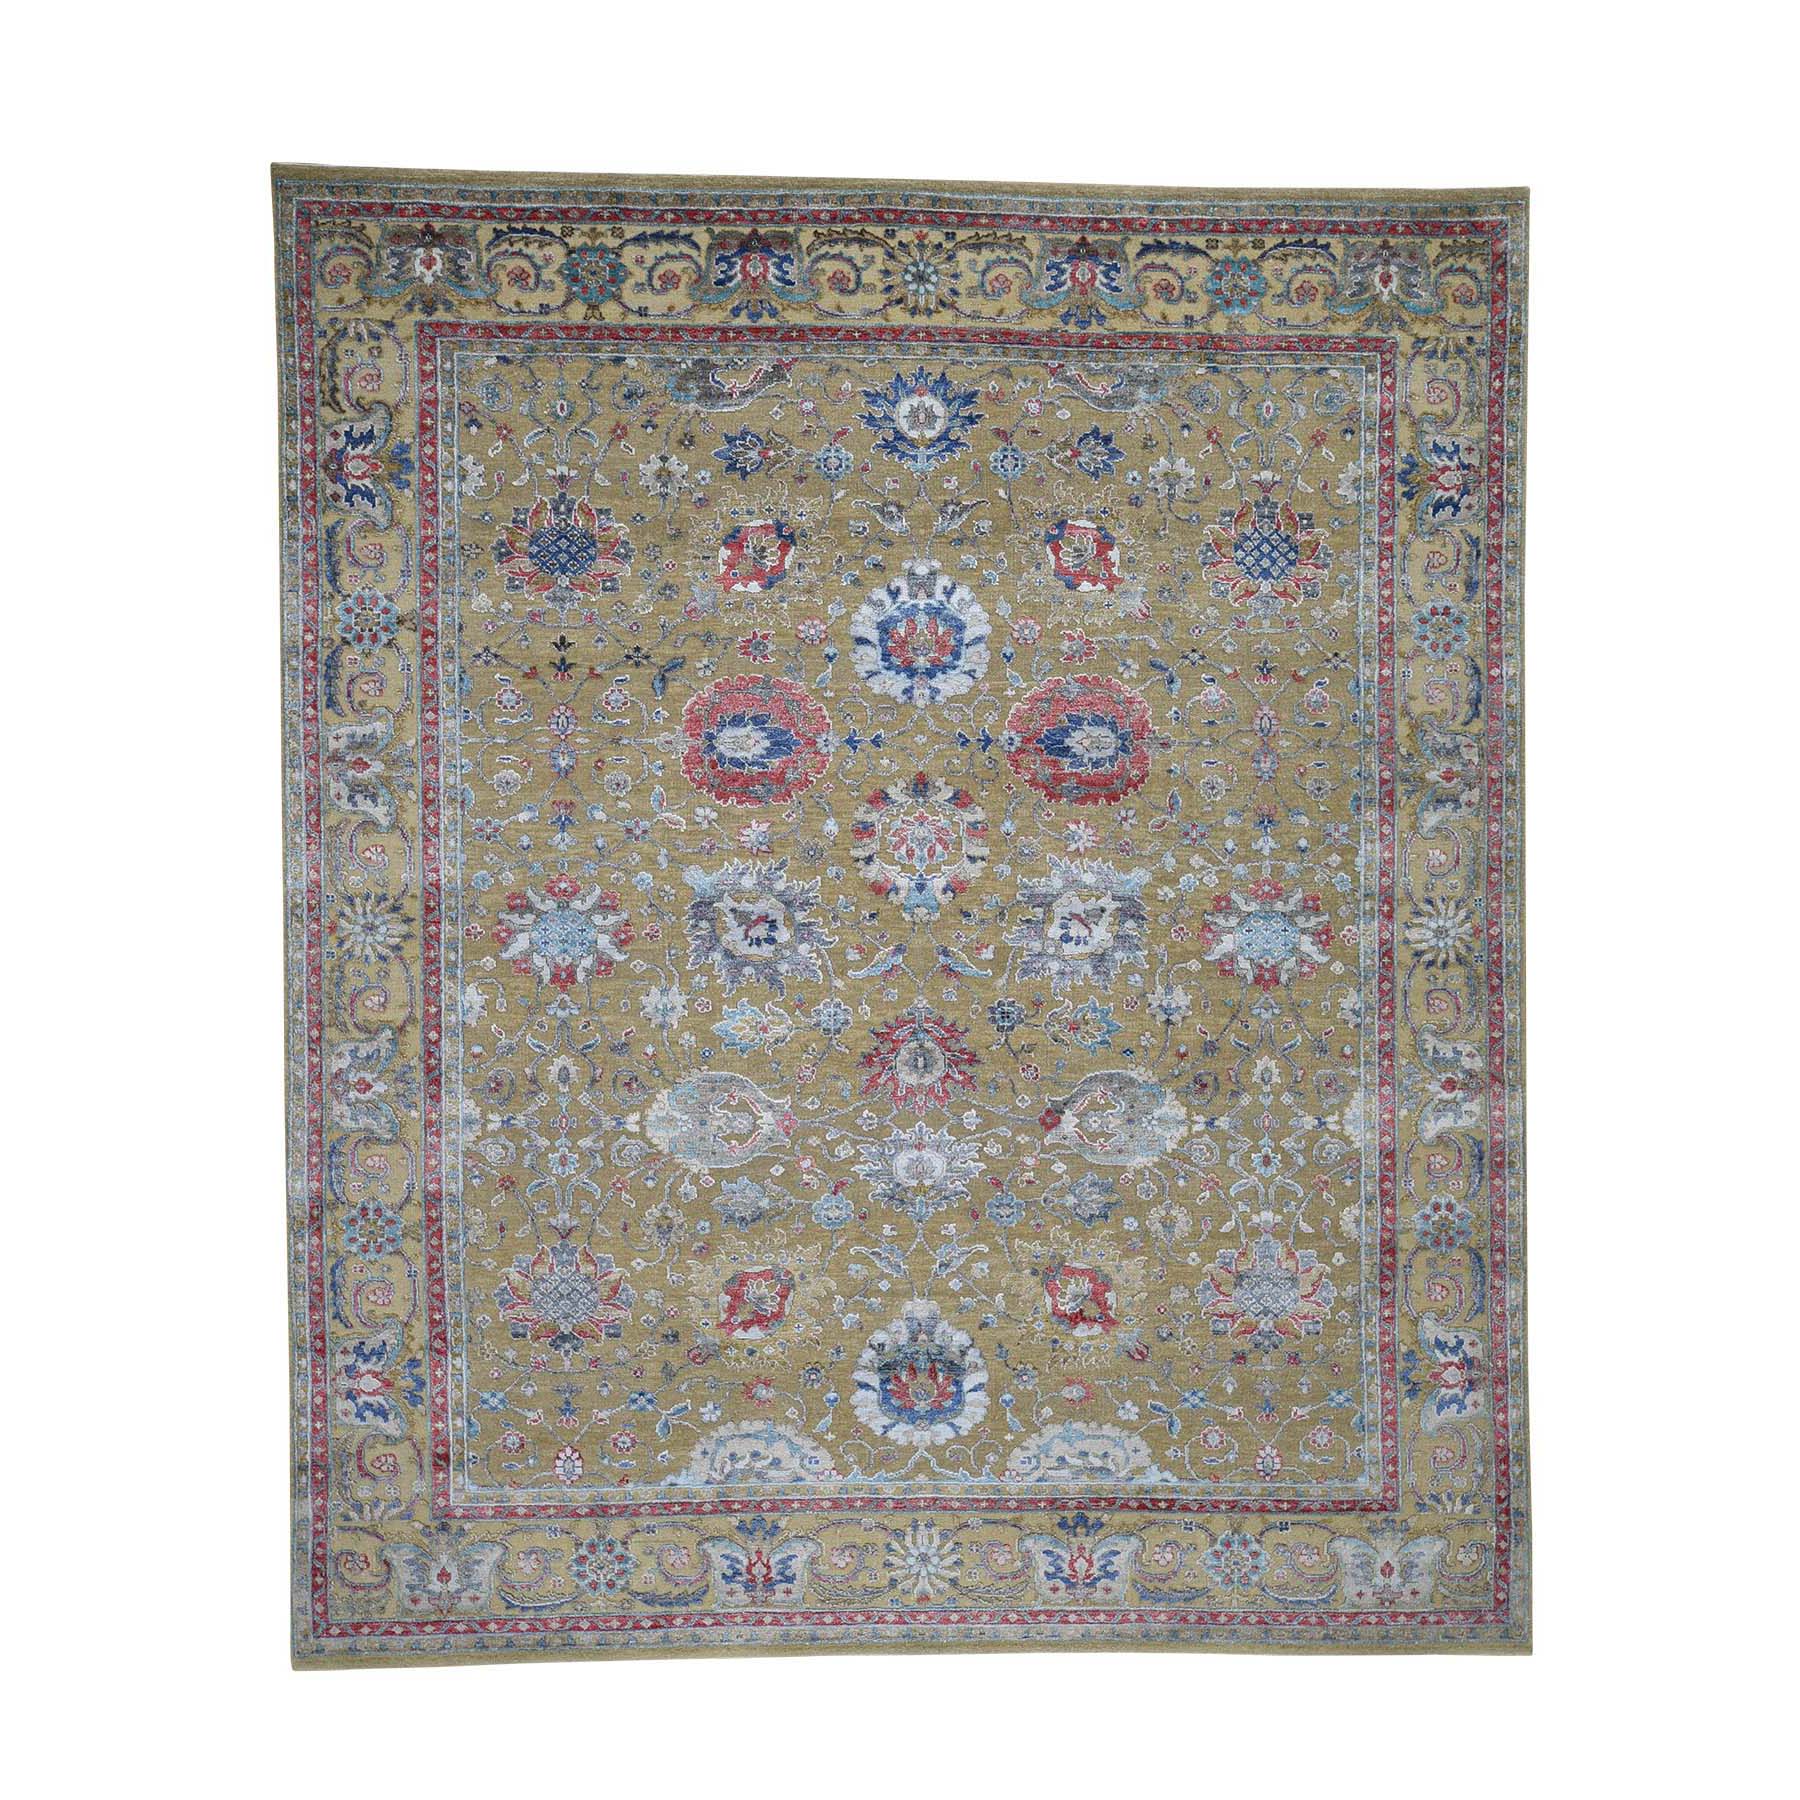 8'1"X9'7" Textured Silk With Textured Wool Mahal Design Hand-Knotted Oriental Rug moada8db